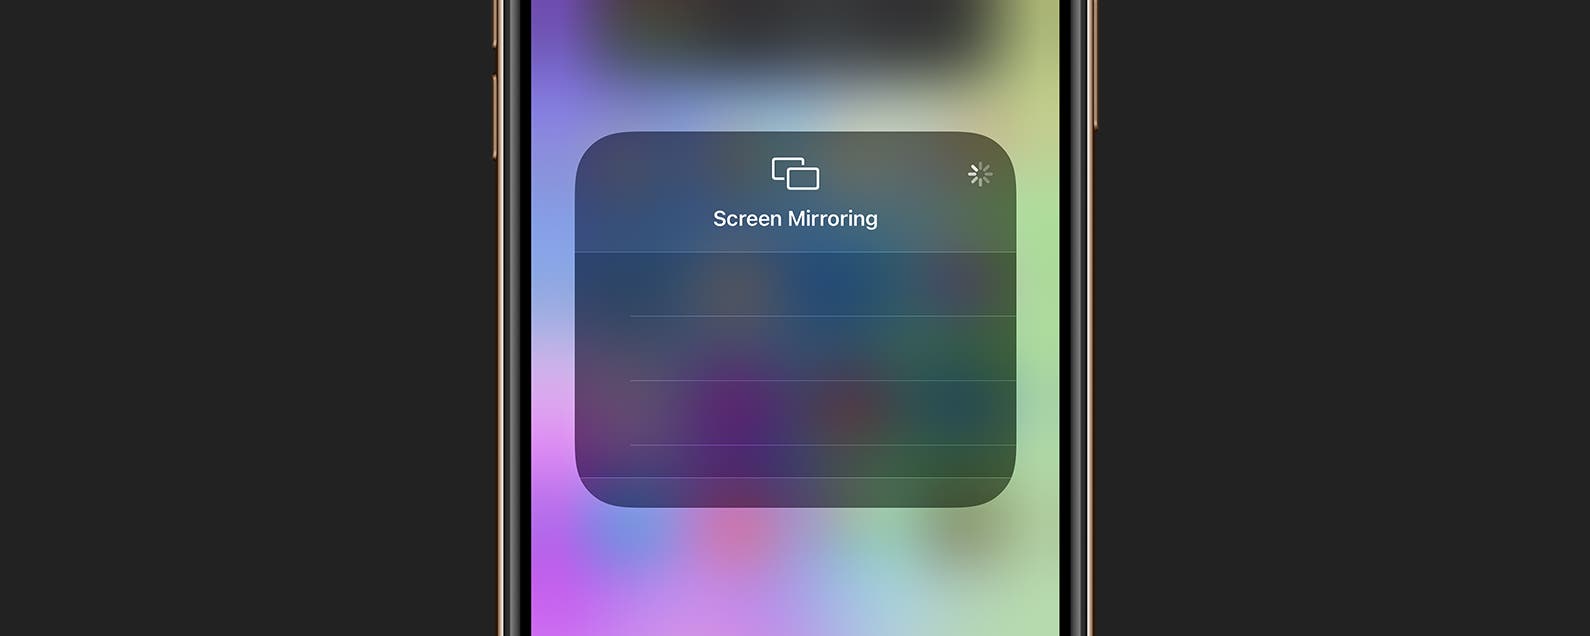 AirPlay Not How to Screen Mirroring Working (iOS 16)